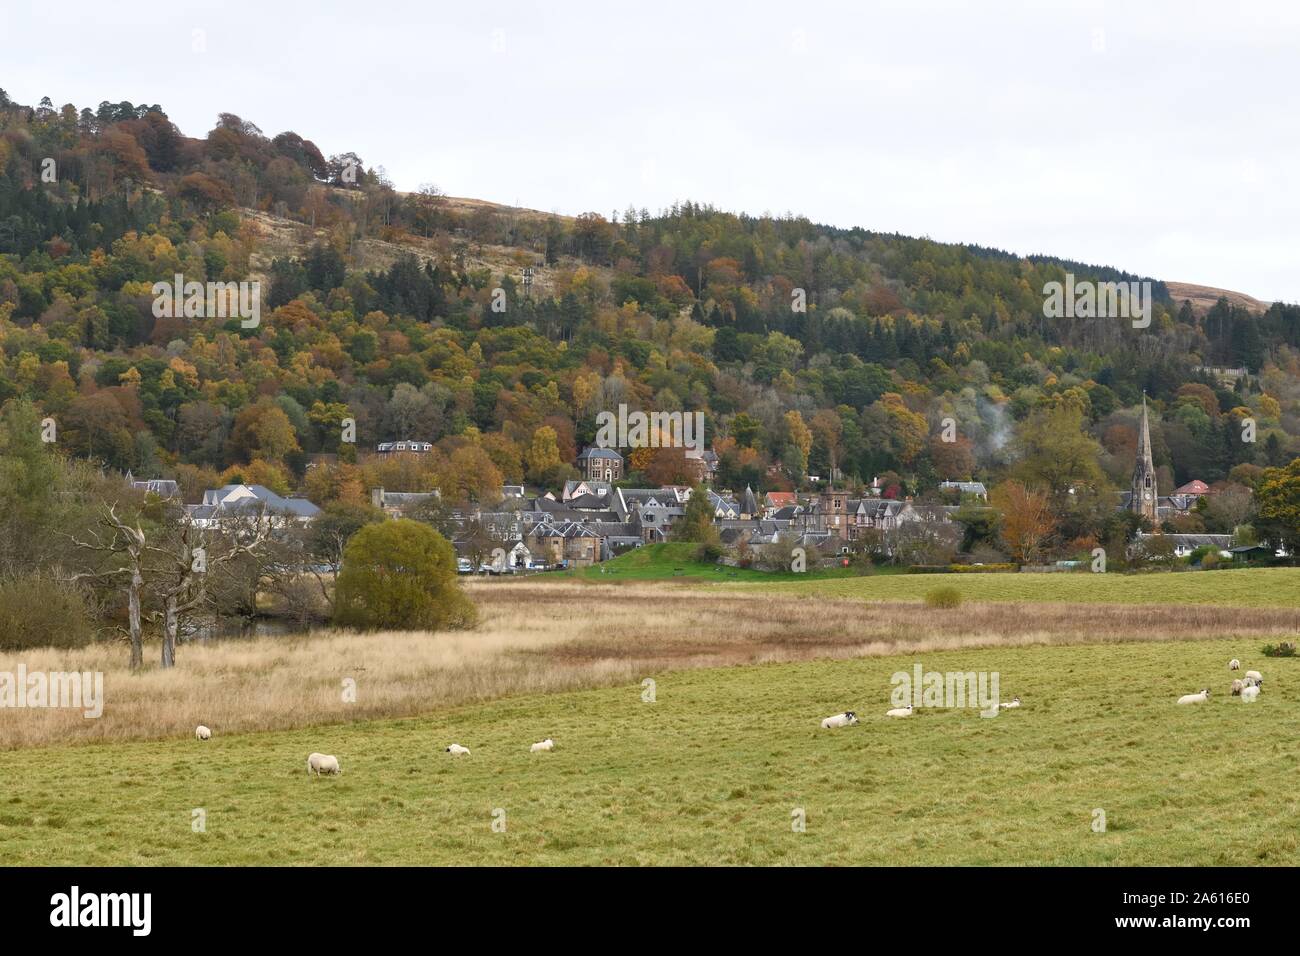 The Scottish town of Callander nestled between the Autumn leaved Callander Crags and the river Teith, in Stirlingshire, Scotland, UK, Europe Stock Photo